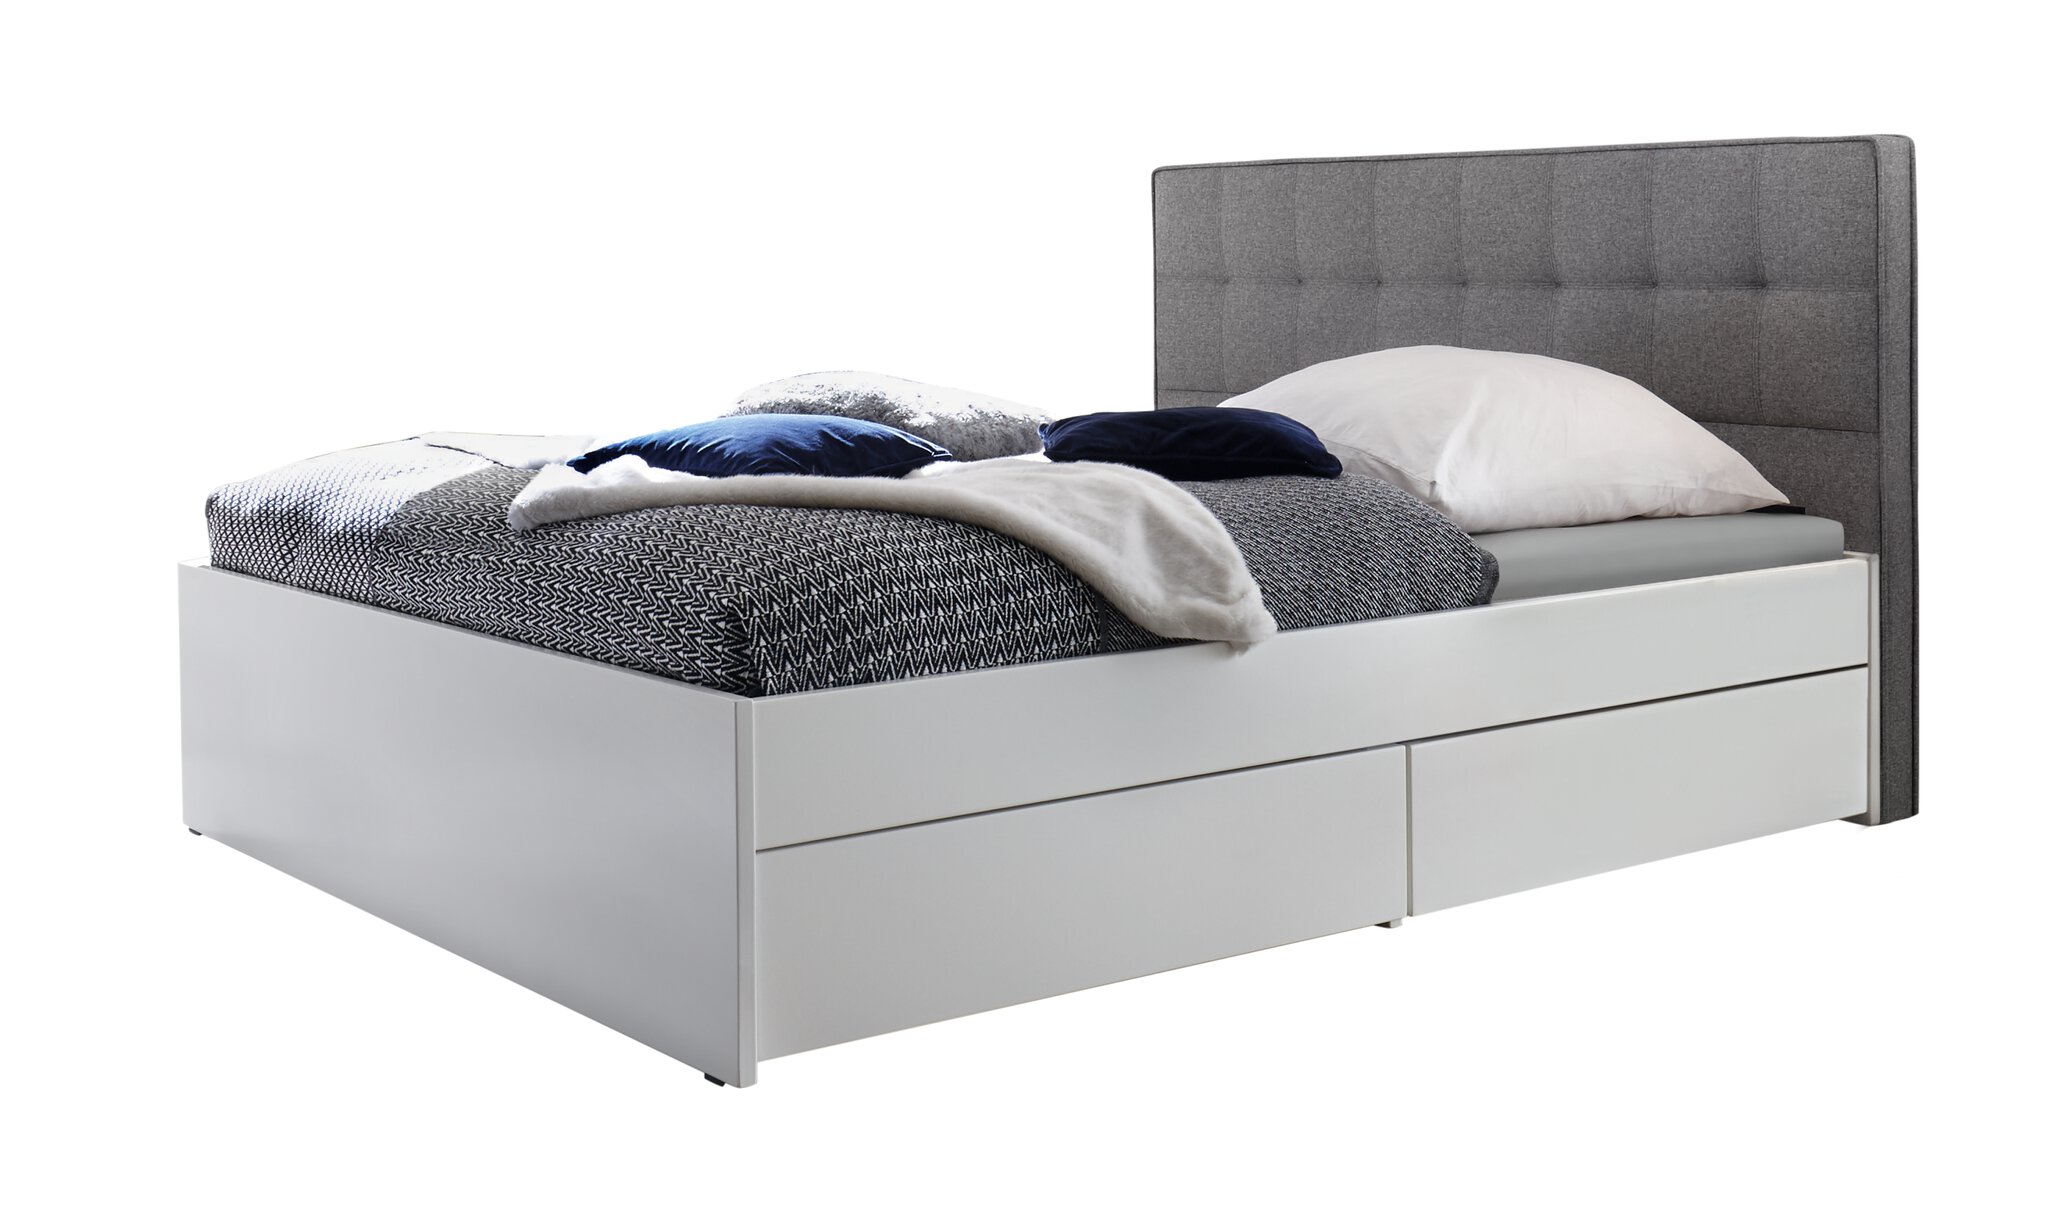 Accessories to beds, headboards, wall panels | HASENA